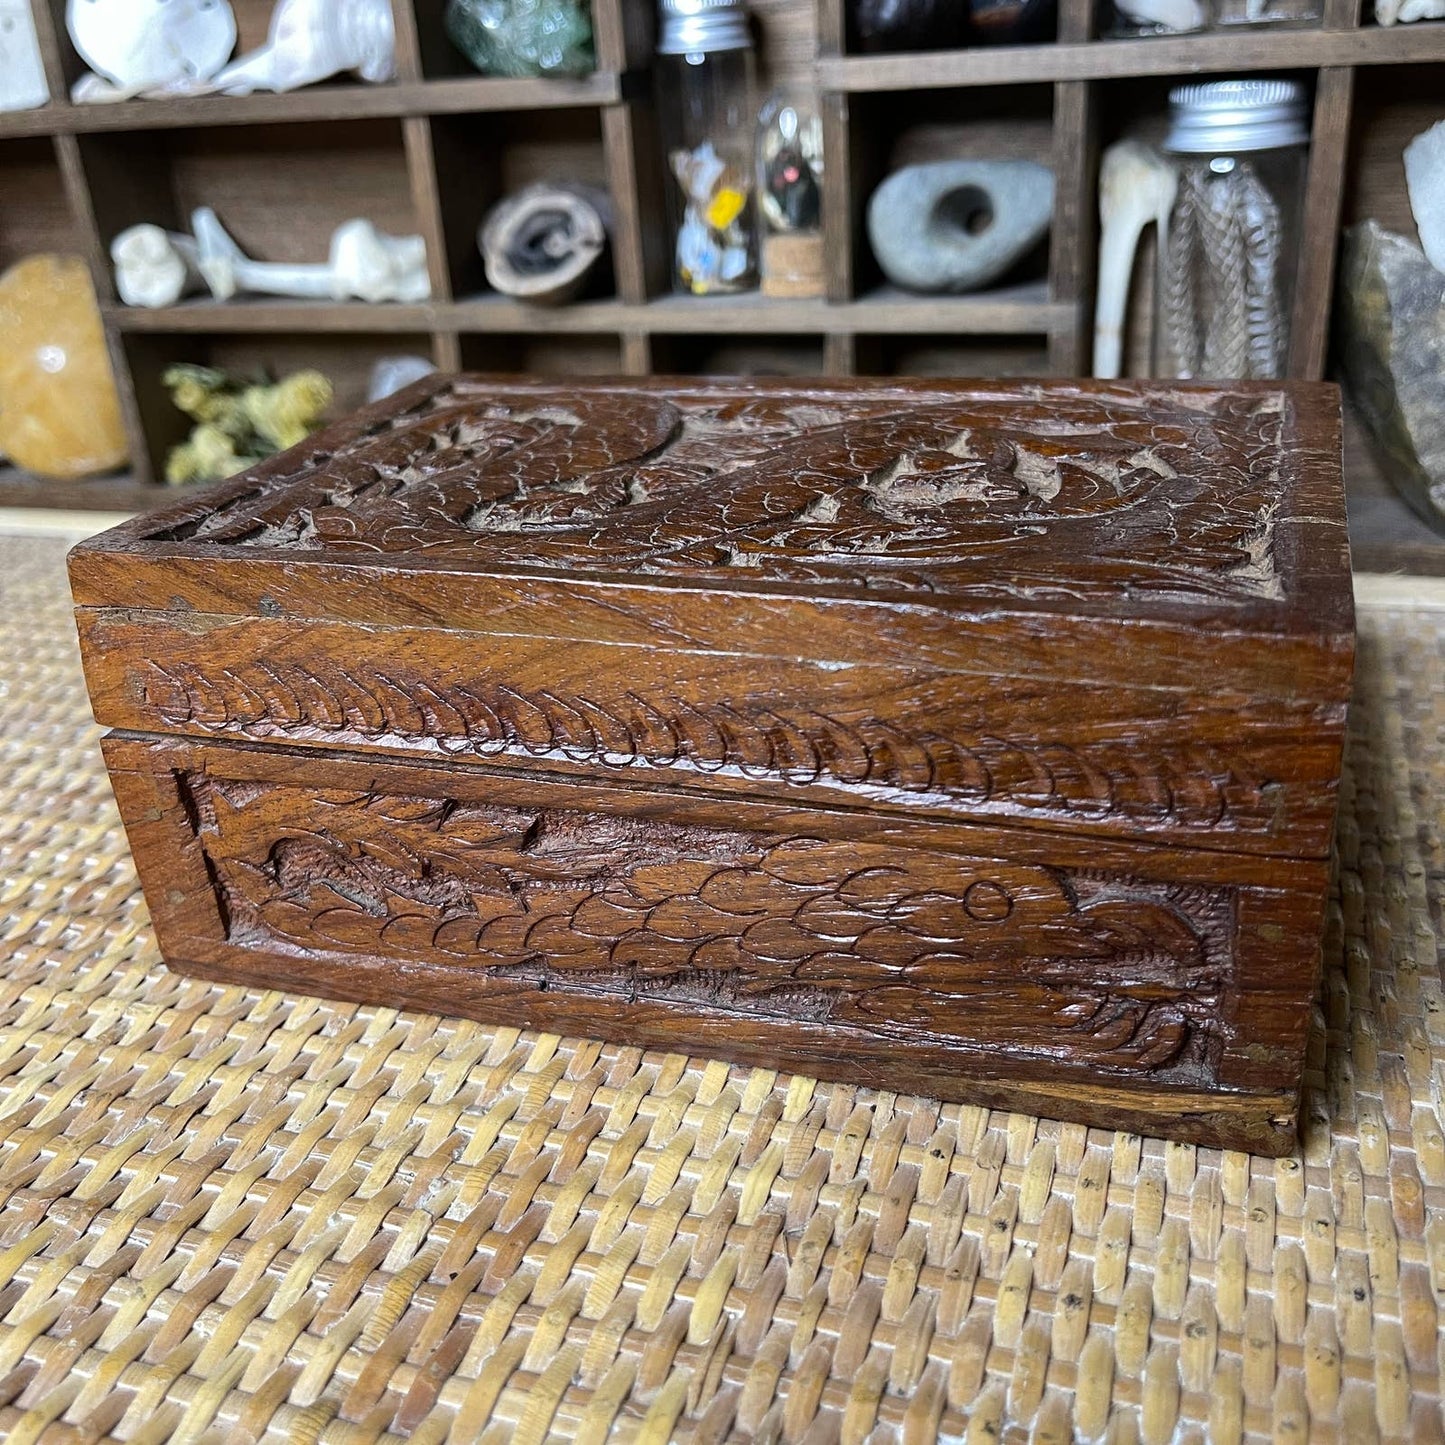 Vintage 90s Carved Wood Dragon Box Altar Kit Witchy Nature Curiosities